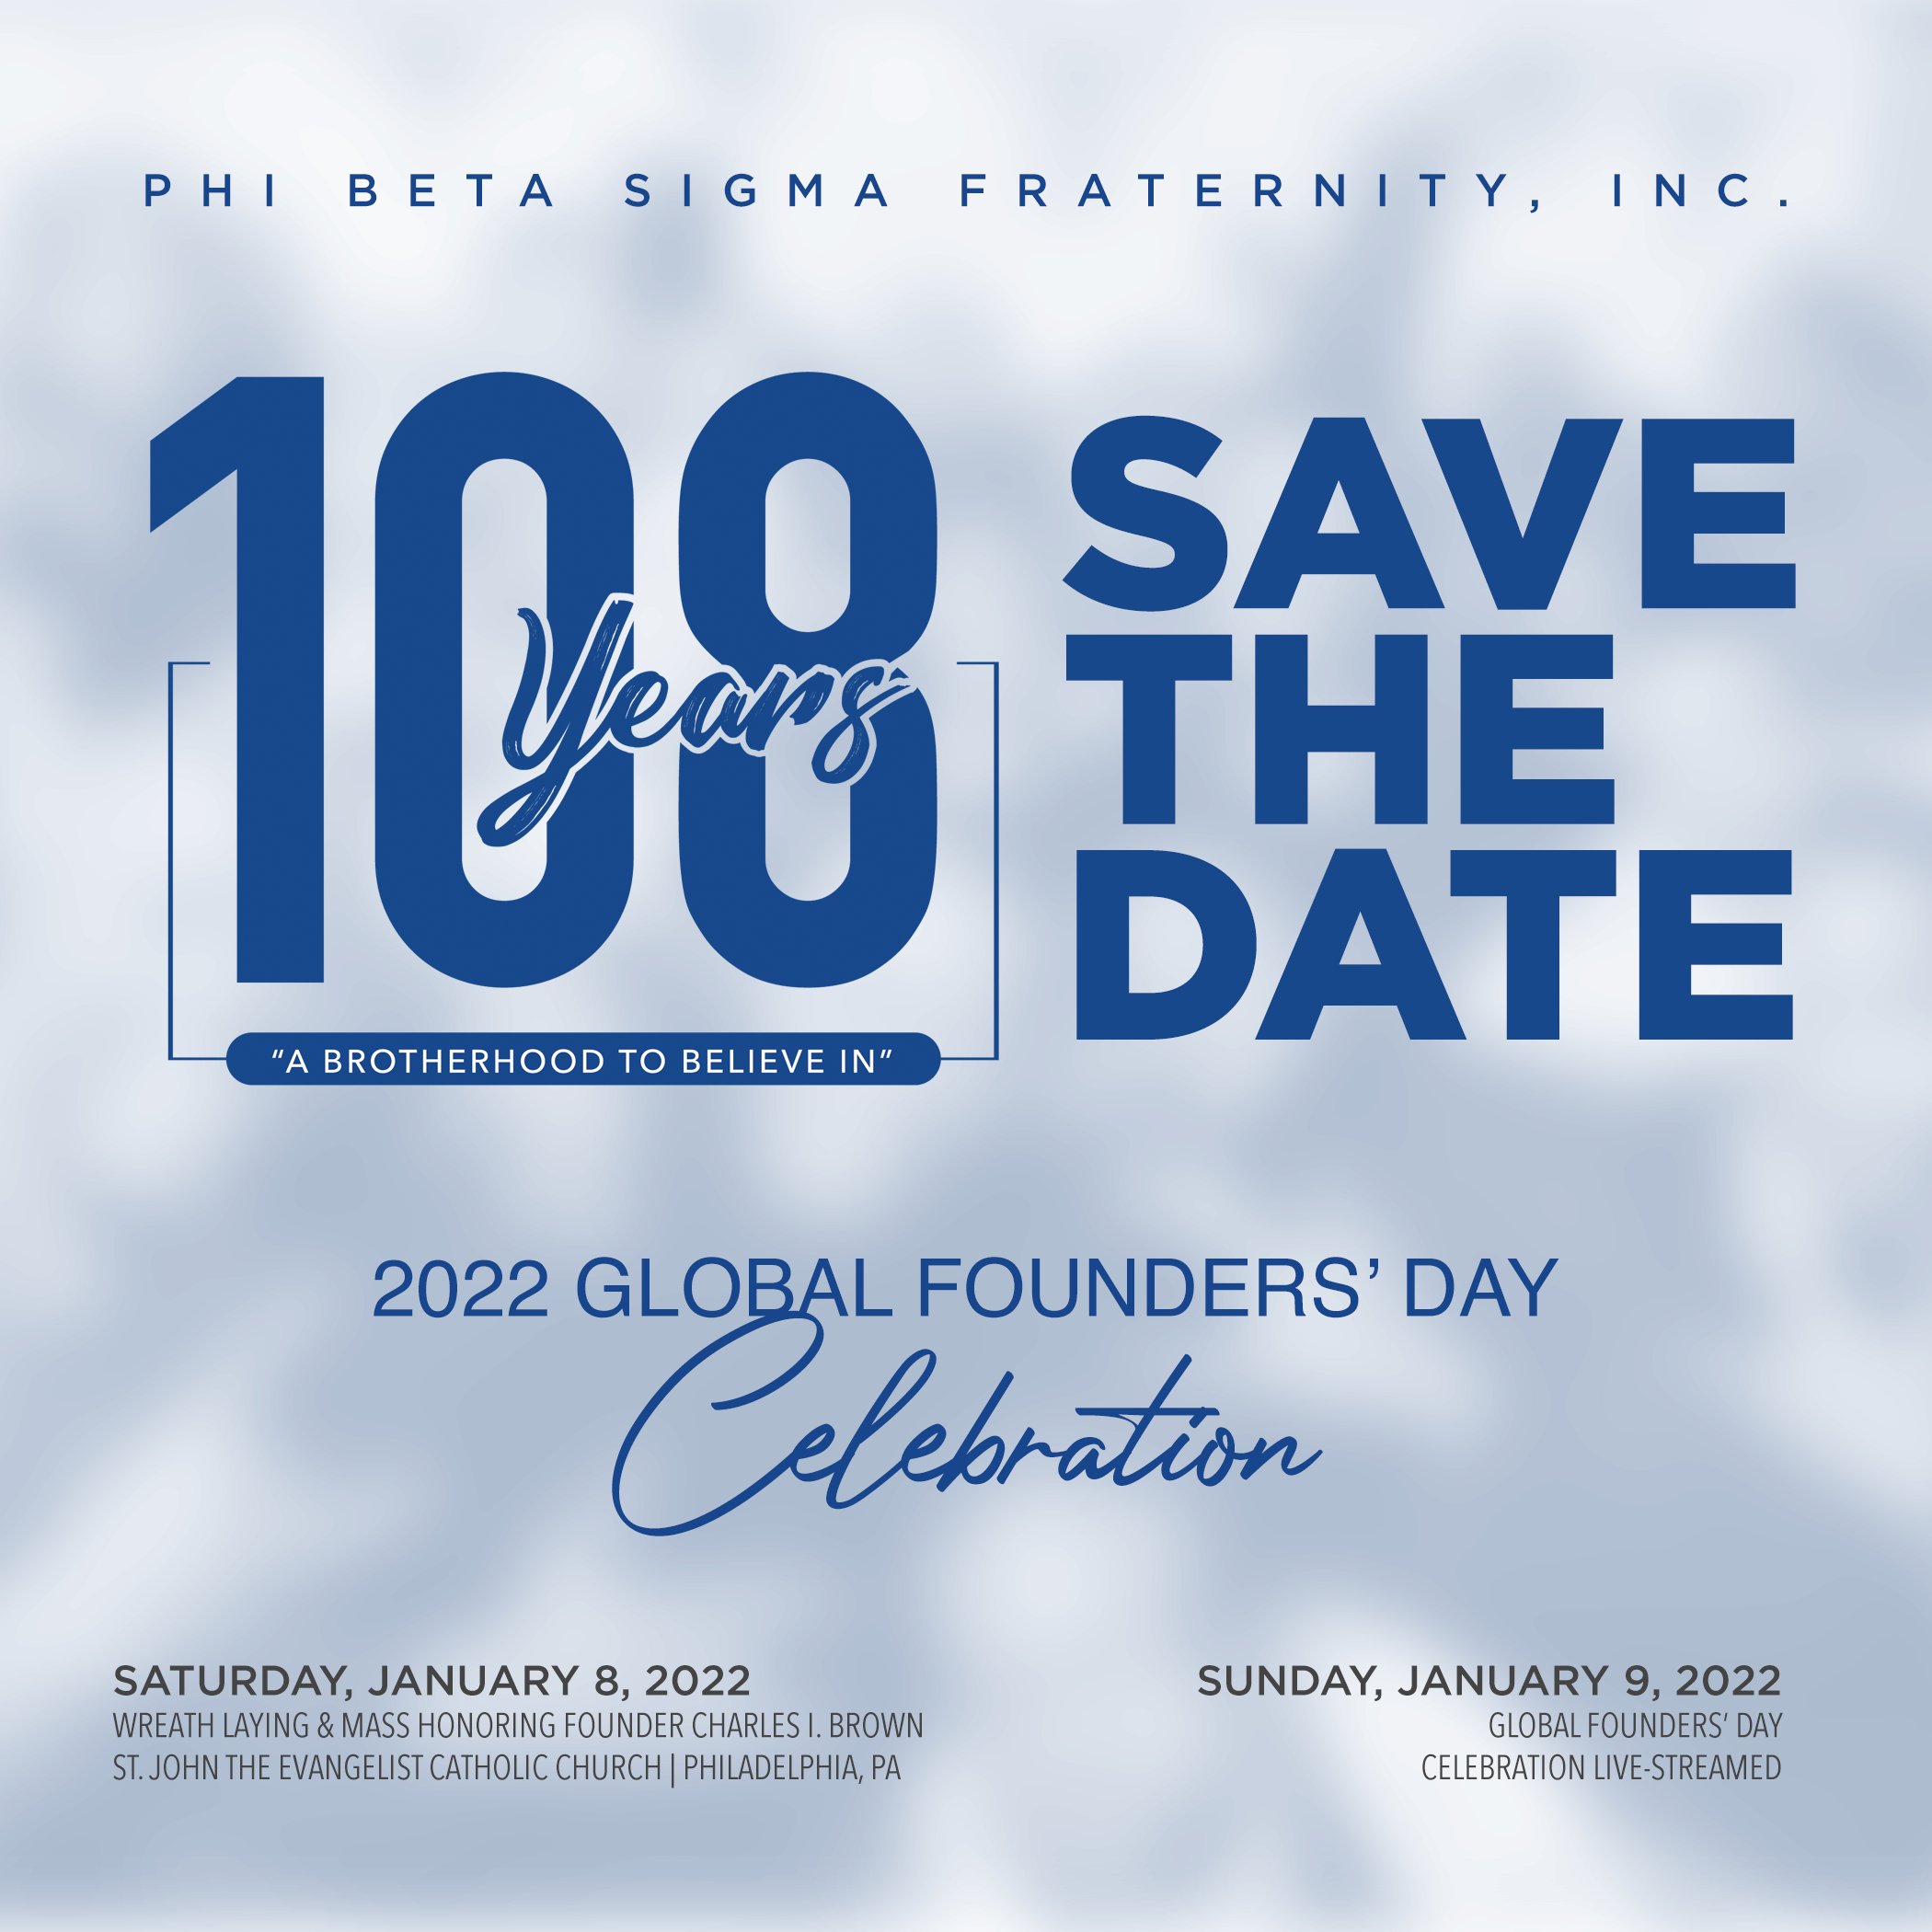 Phi Beta Sigma Savethedate For Our 22 Global Founders Day Celebration A Brotherhood To Believe In On Jan 9 22 Live Streaming On Facebook Twitter And Youtube Pbs1914 Sigma108 T Co Khsp5eeiid